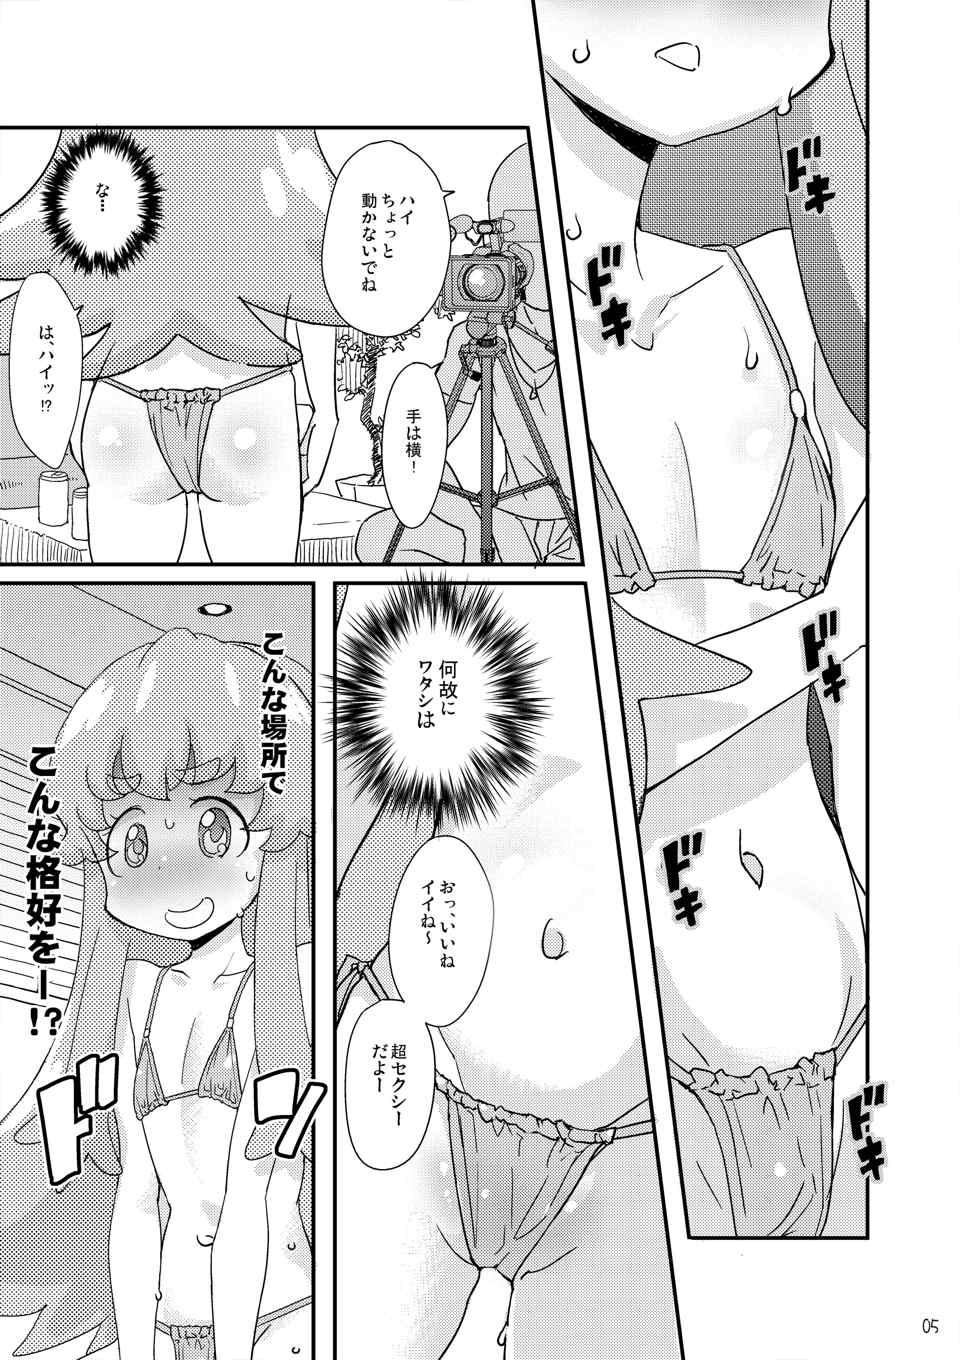 Big Booty HachaMecha Princess HiME-chan - Happinesscharge precure Chibola - Page 5